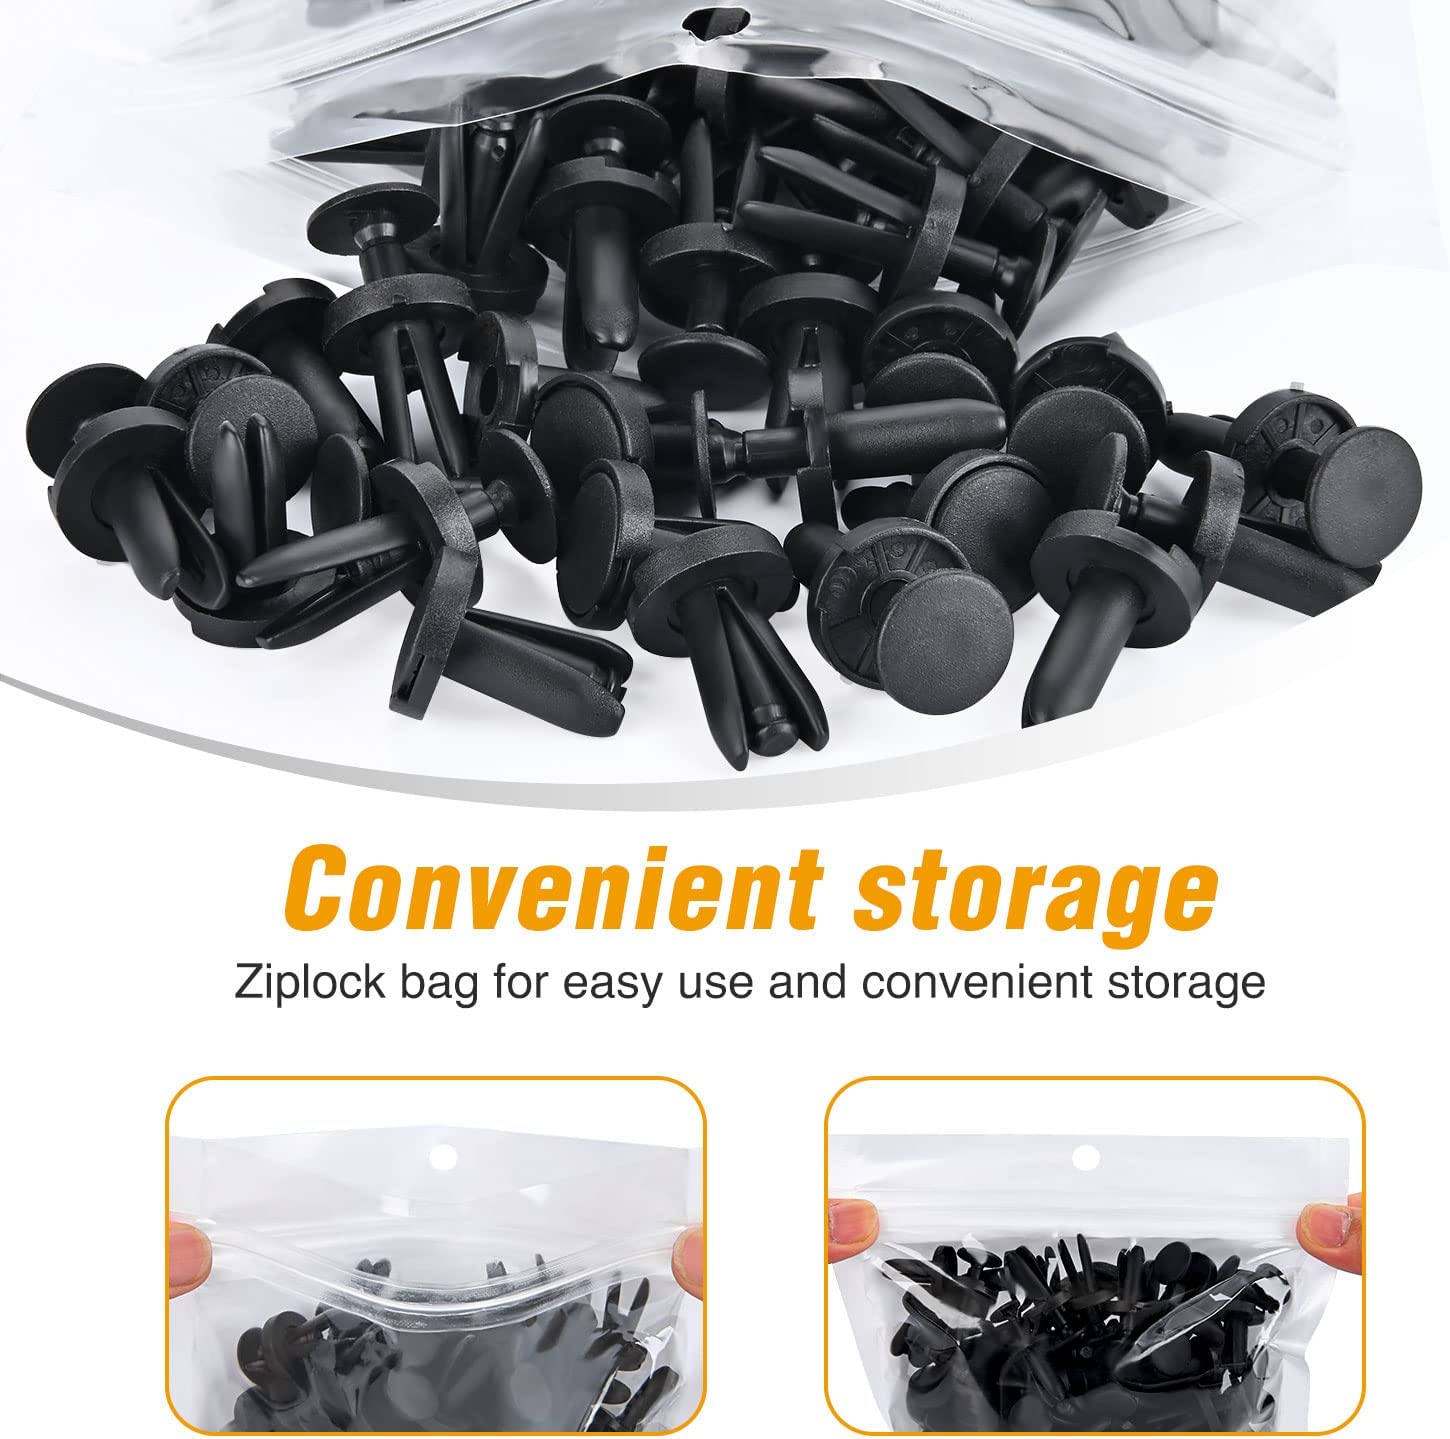 100 Pcs Head 18.5mm Hole 8mm Fender Liner Clips For Dodge Jeep Grand Cherokee Ram Nilight